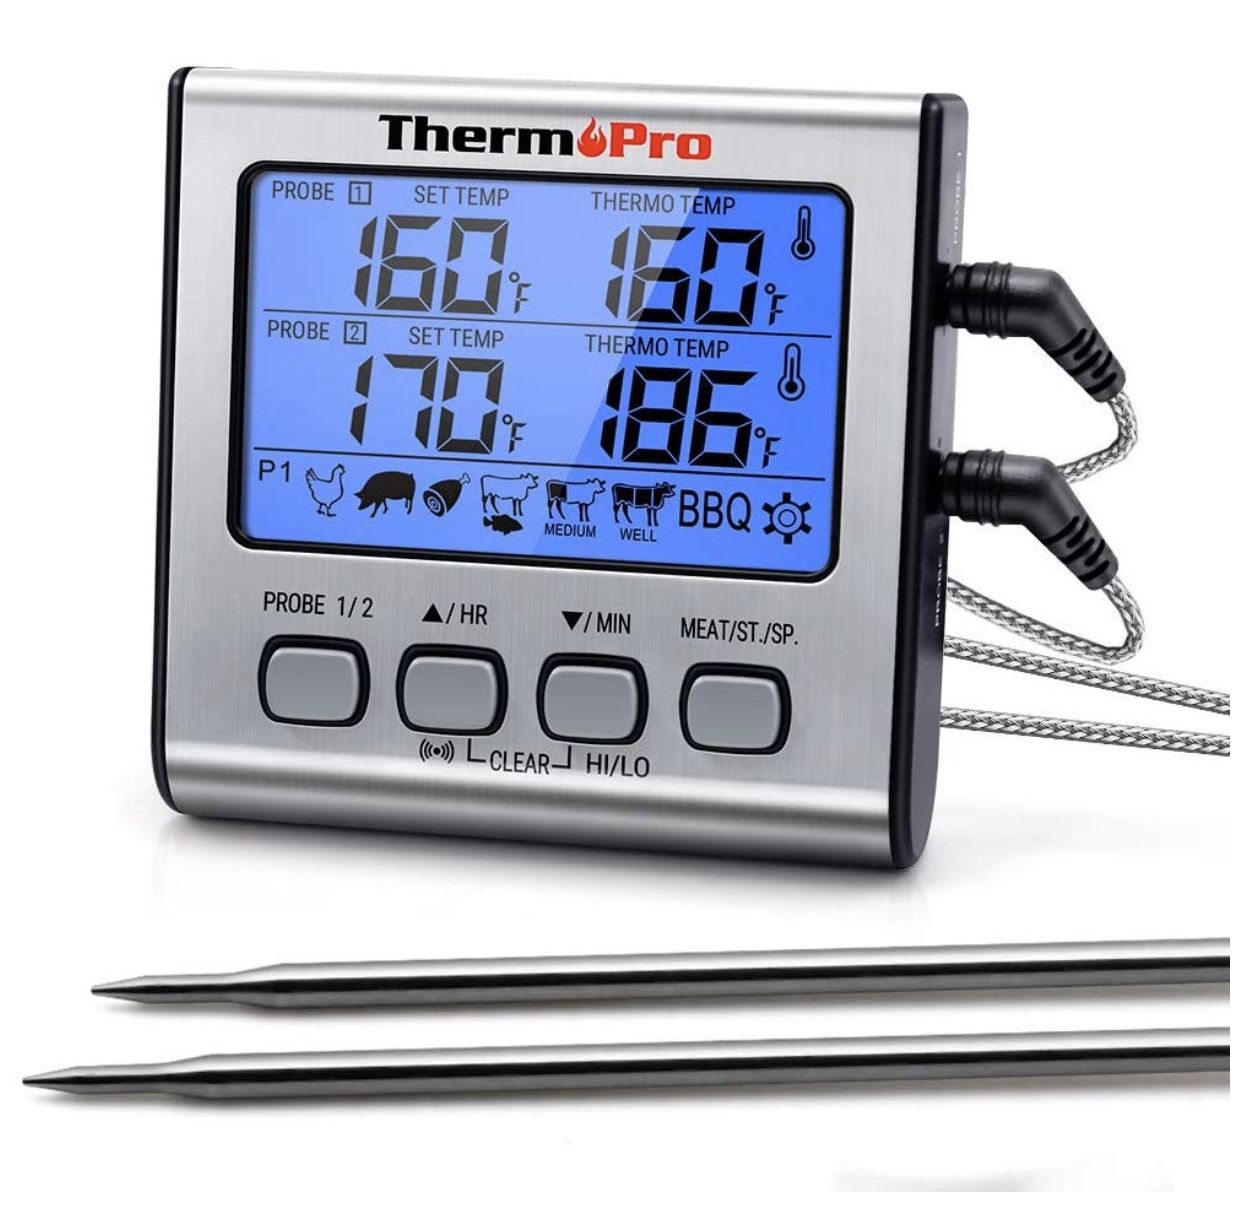 ThermoPro TP-17 Dual Probe Digital Cooking Meat Thermometer Large LCD Backlight Food Grill Thermometer with Timer Mode for Smoker Kitchen Oven BBQ, S